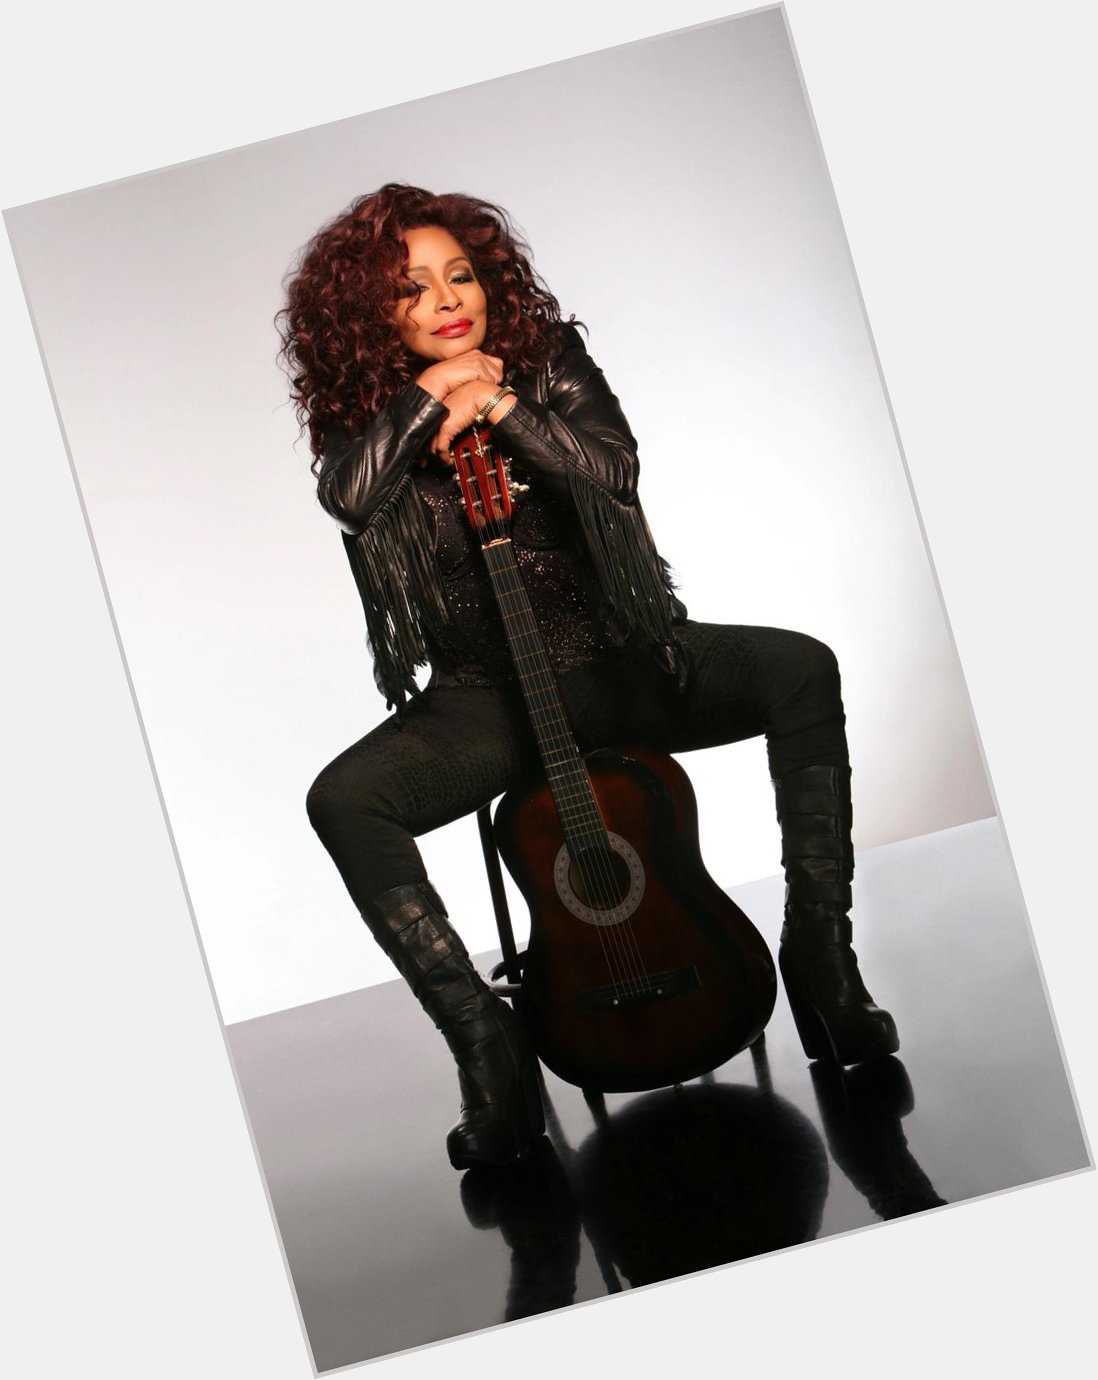 Happy Birthday to music icon  What your top 5 songs by Chaka Khan? 